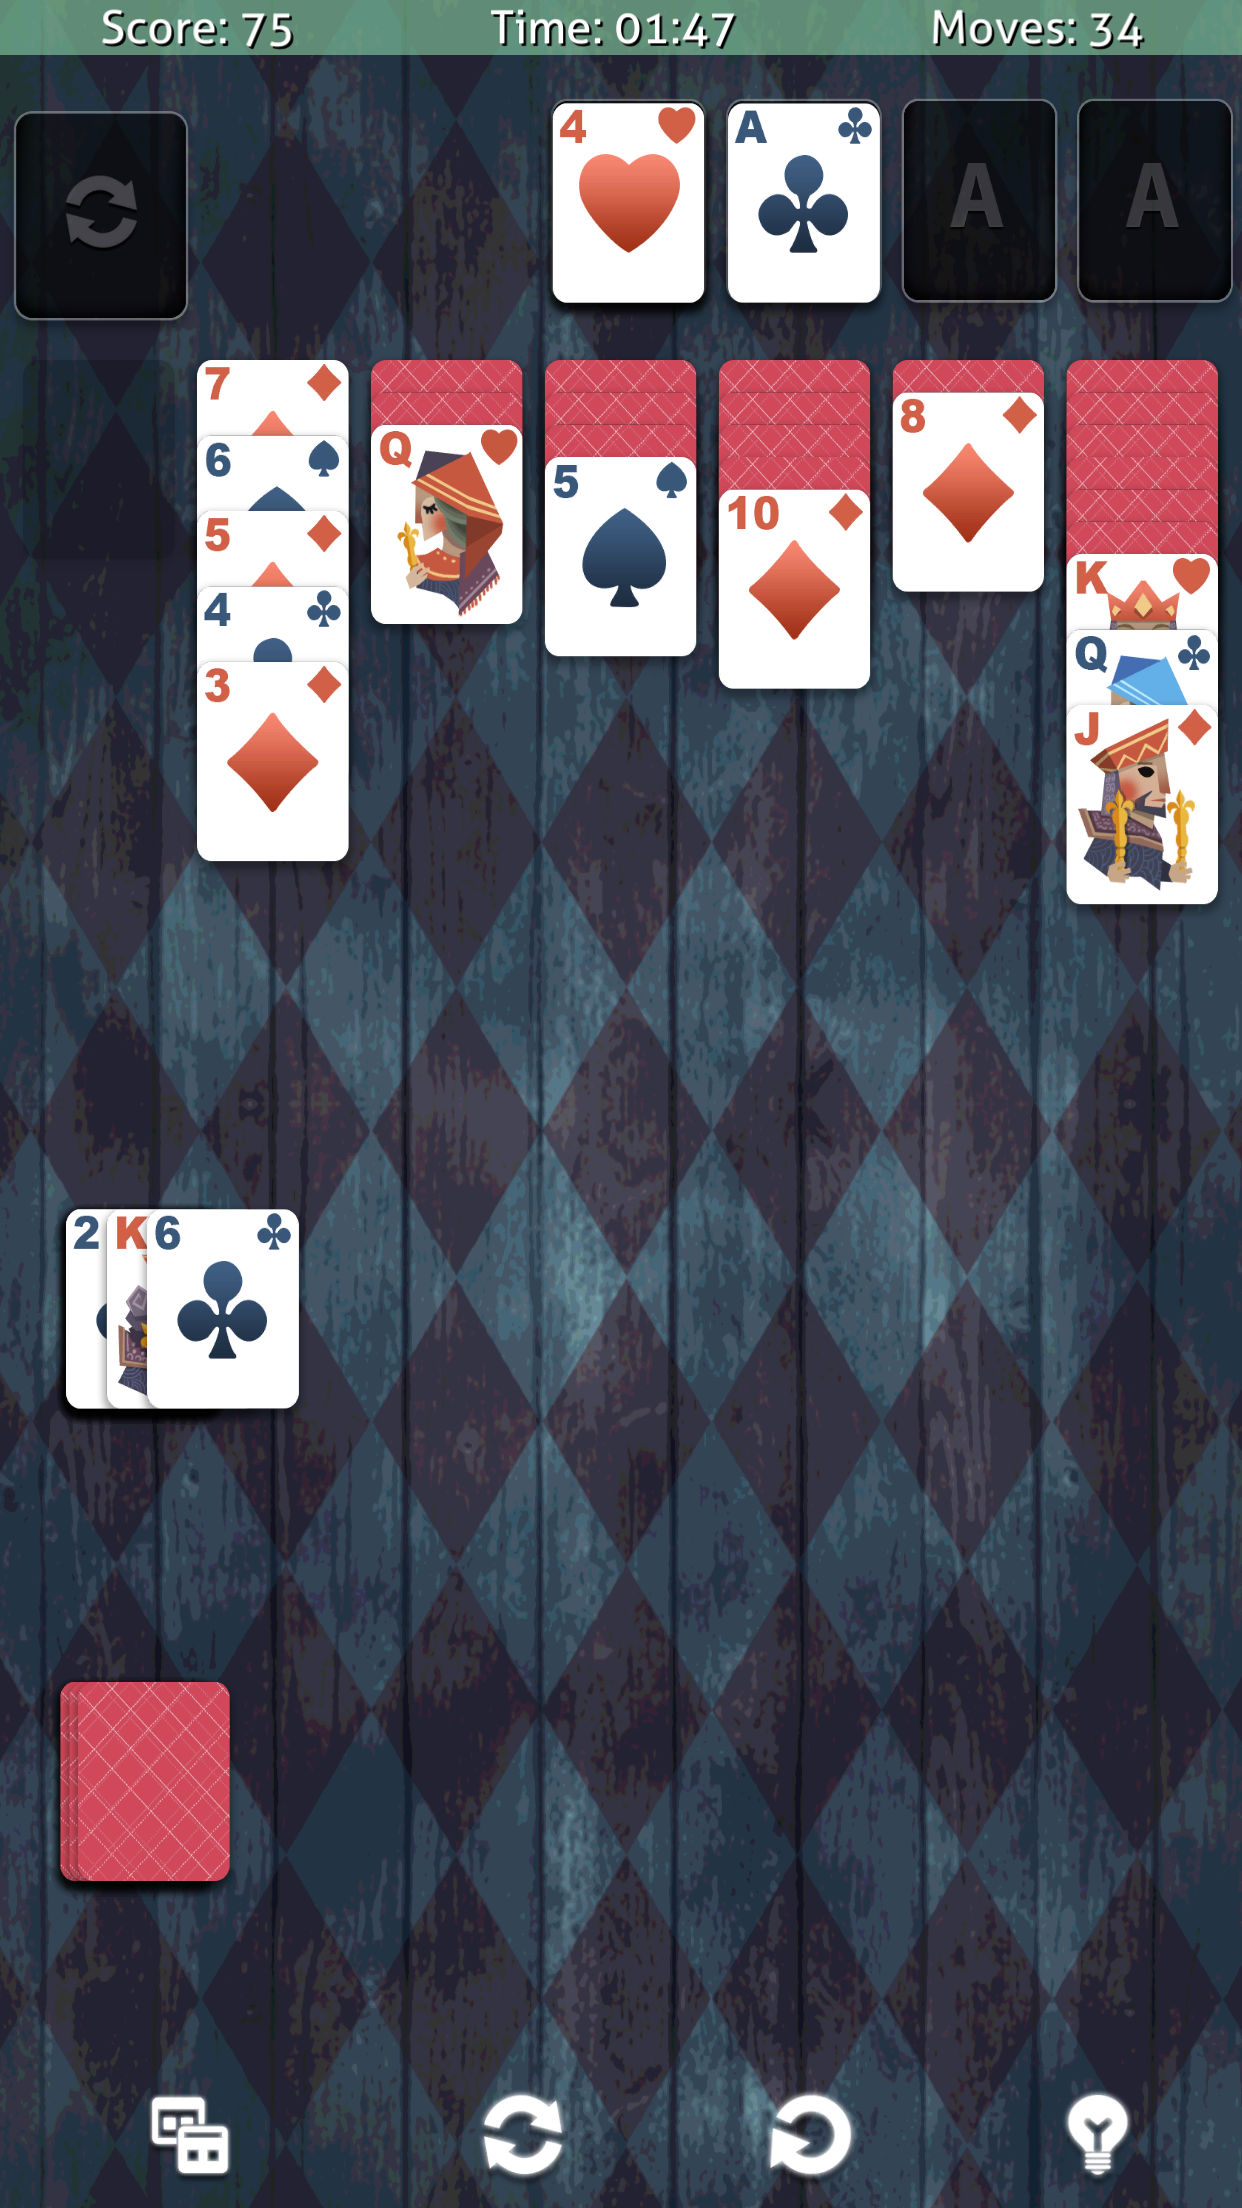 Solitaire #1 / Solitaire Kings Ultimate Game Apple AppStore - Google Play Store Image 2